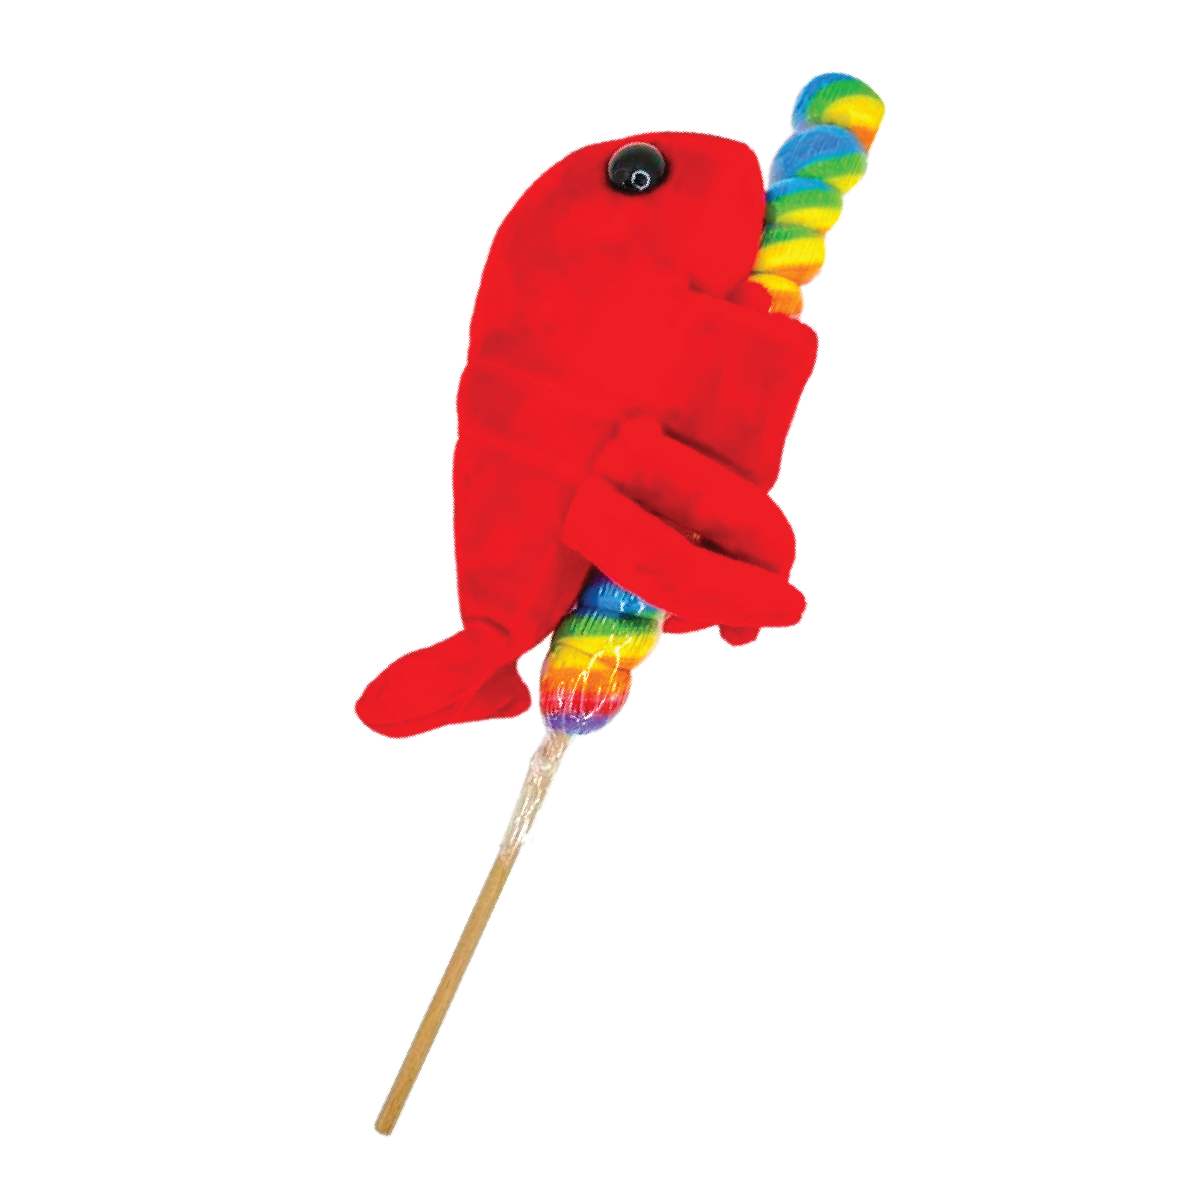 Lobster Snap-On With Lollipop